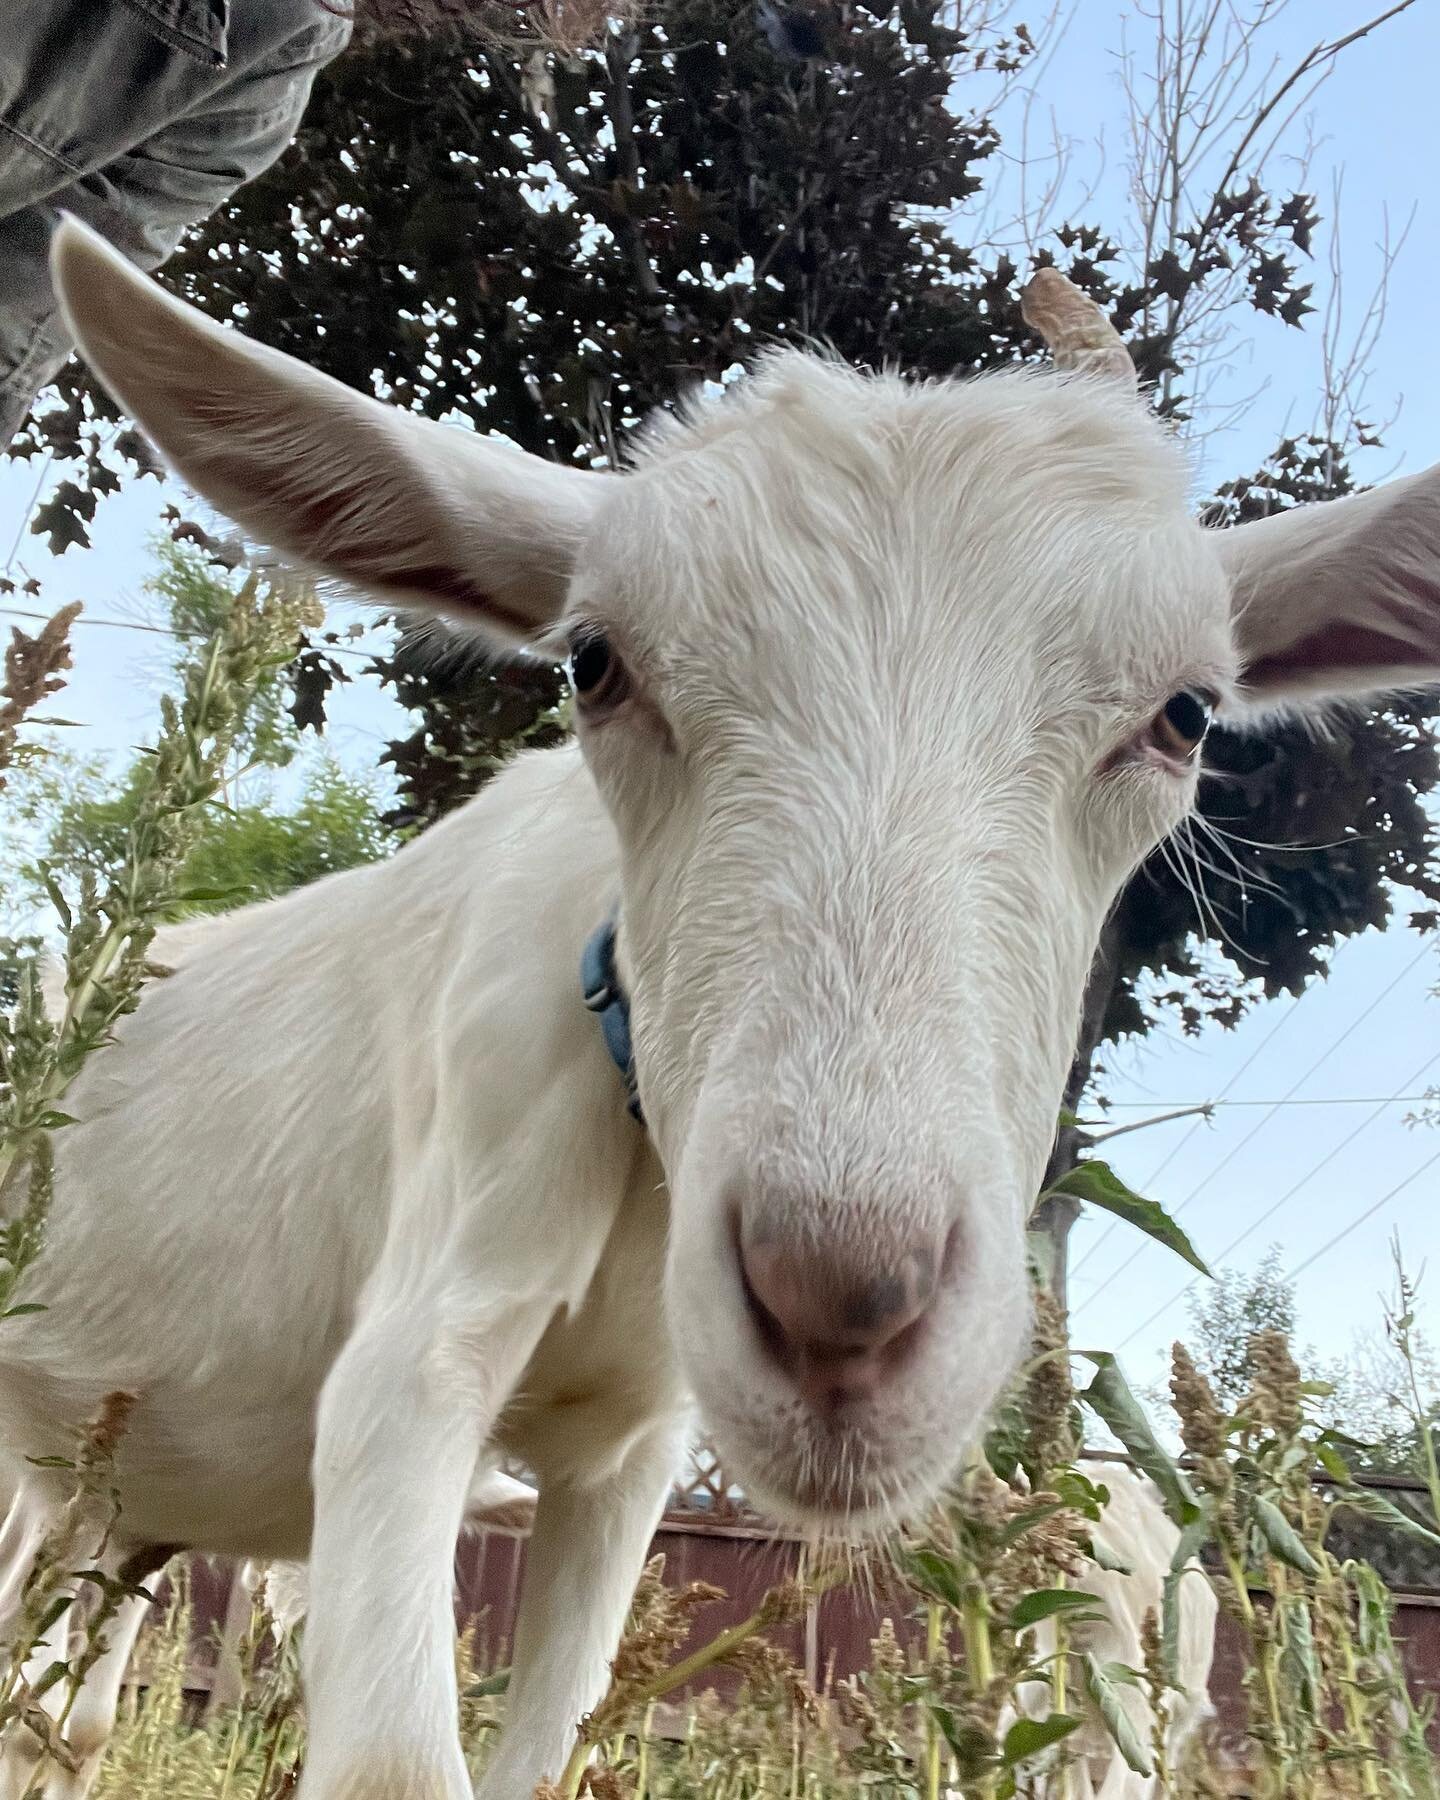 Hello DuranGoats fans! Meet Barge! Barge is a big sweetie. He&rsquo;s one of the top dogs and cool cats of the goat herd. He likes to boop with his nose and to go nomnomnomnom aaall the way home.